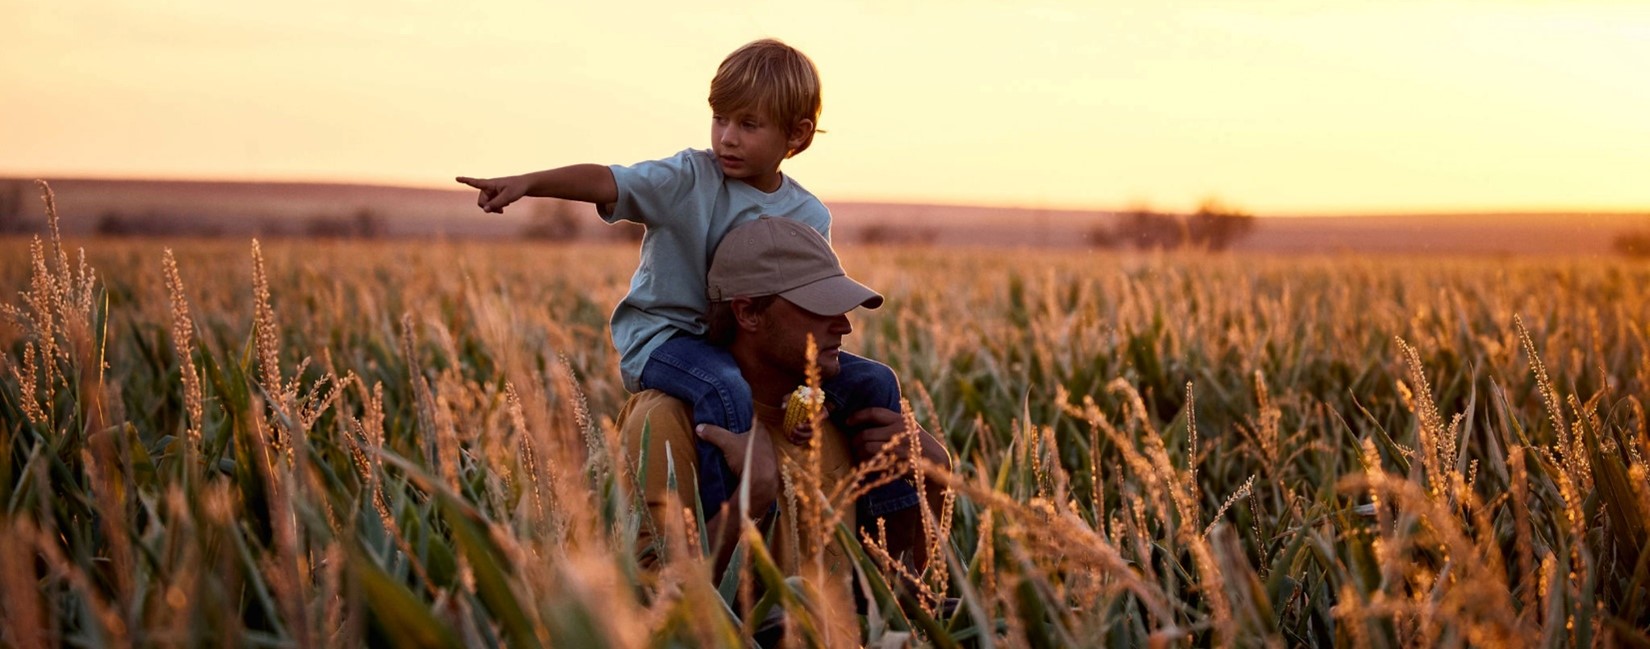 A man is standing in the field with a boy on his shoulders.